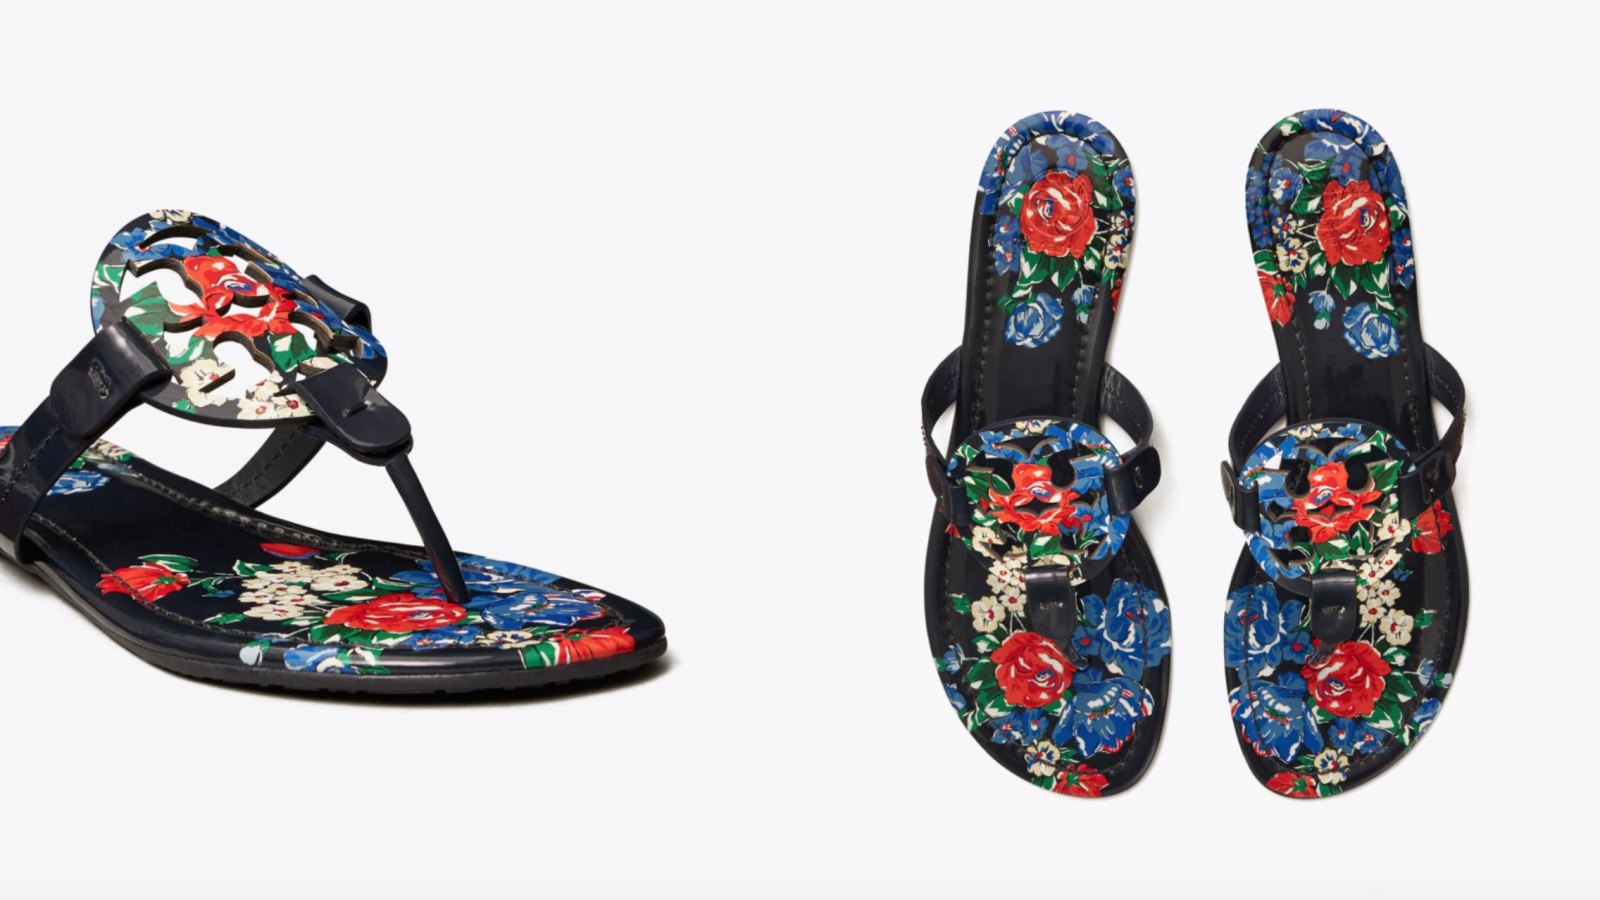 Tory Burch Printed Miller Sandals Are on Sale Under $150 | Us Weekly